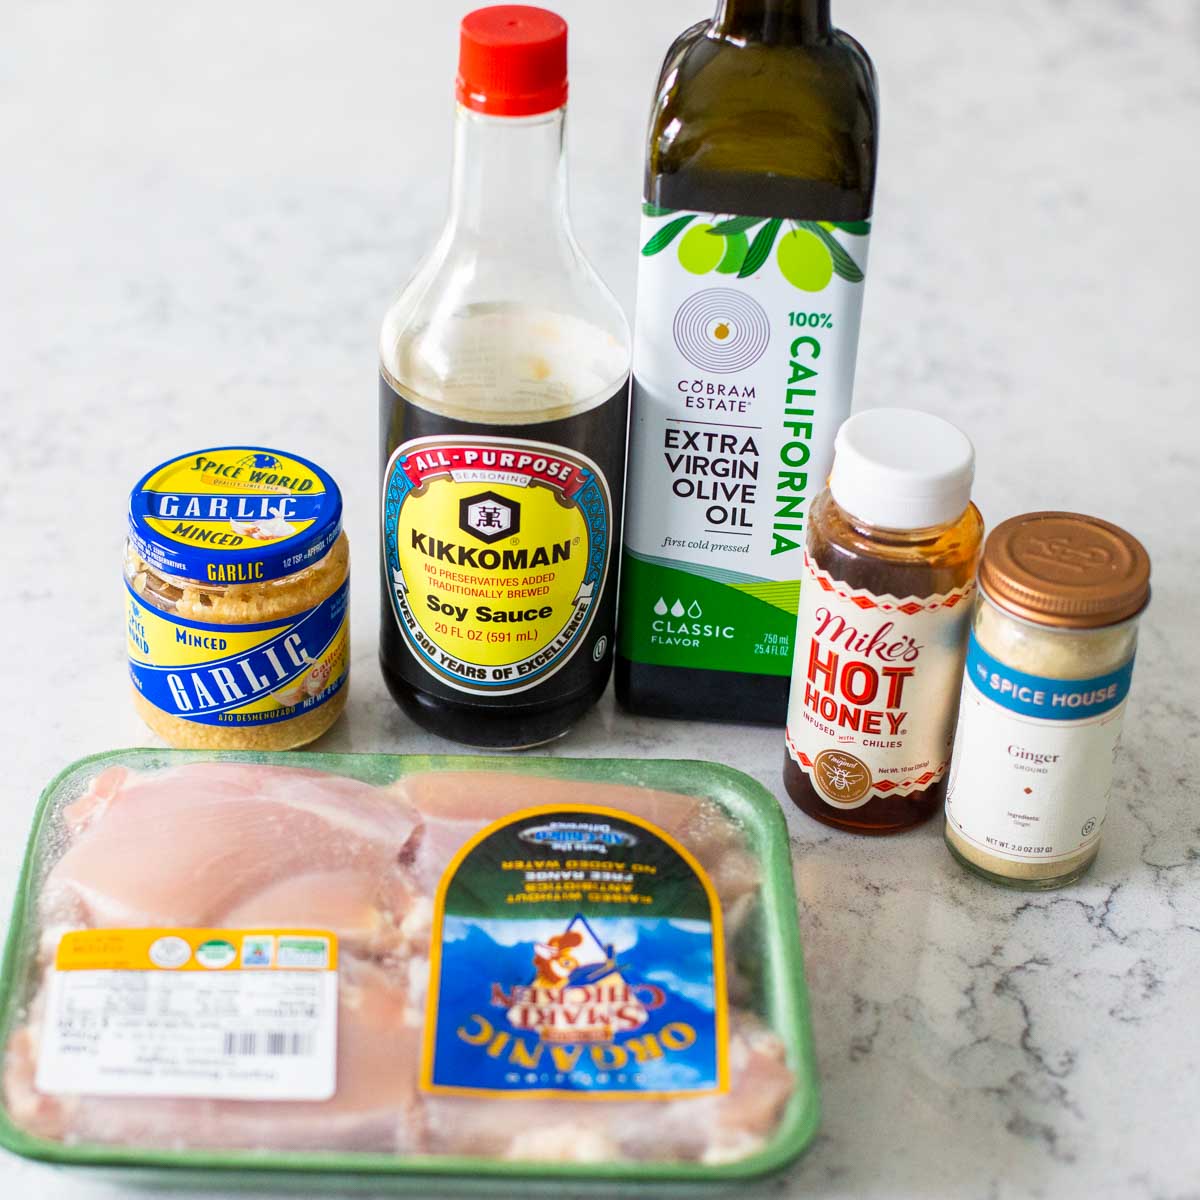 The honey garlic marinade ingredients sit next to a package of chicken thighs.